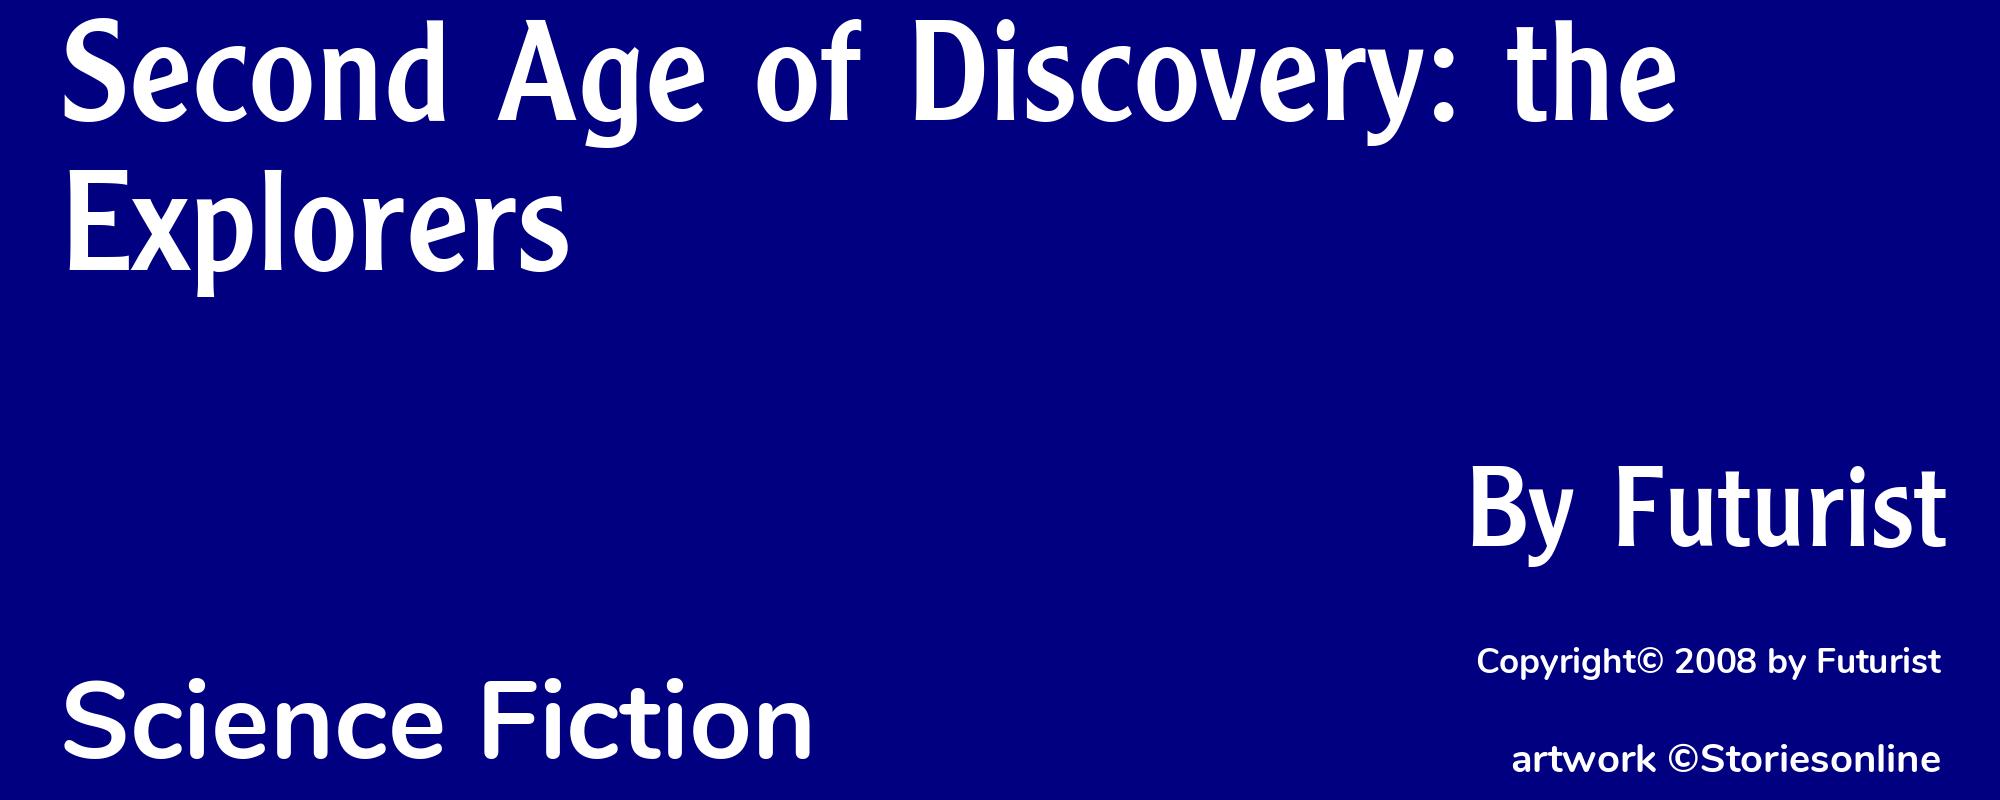 Second Age of Discovery: the Explorers - Cover